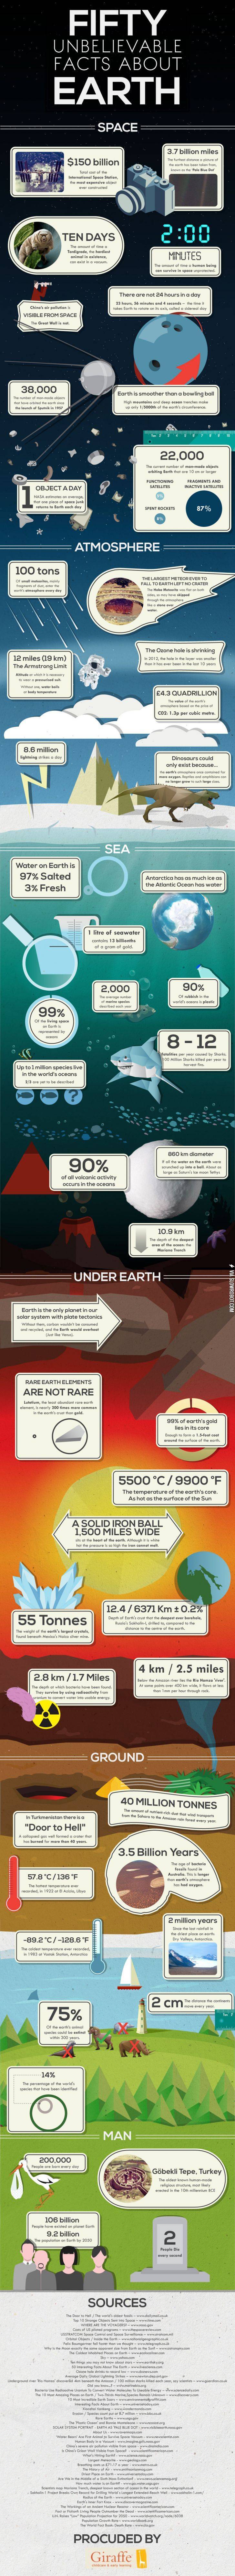 50+unbelievable+facts+about+earth.